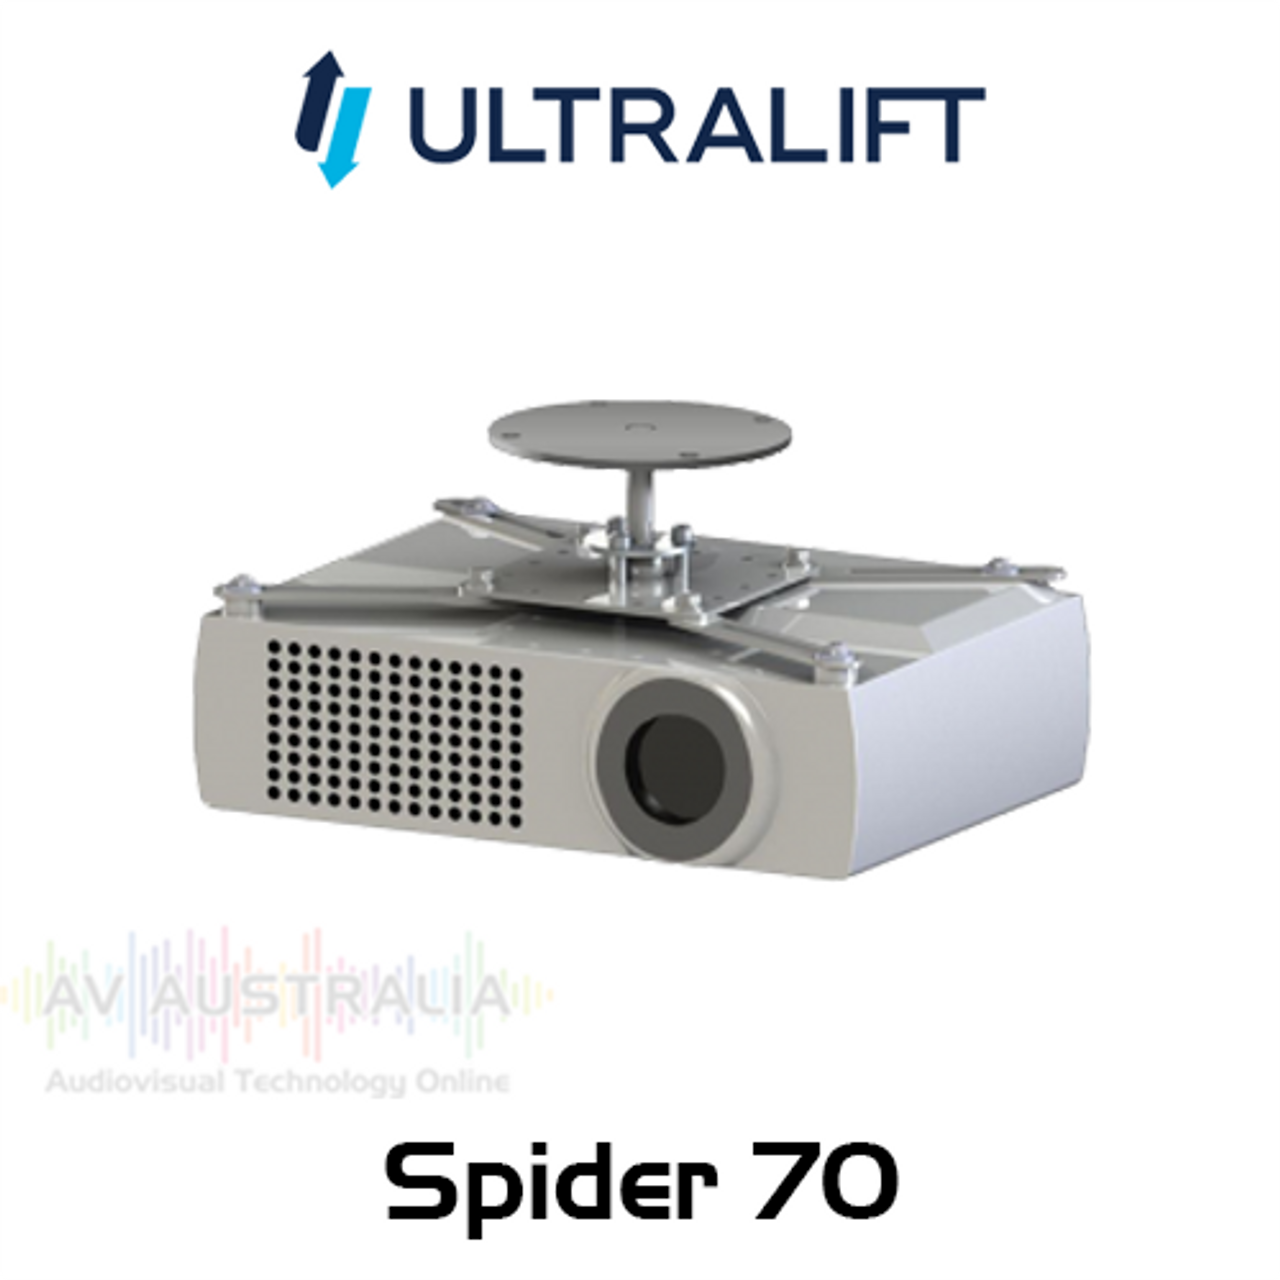 Ultralift Spider Ceiling Projector Mount